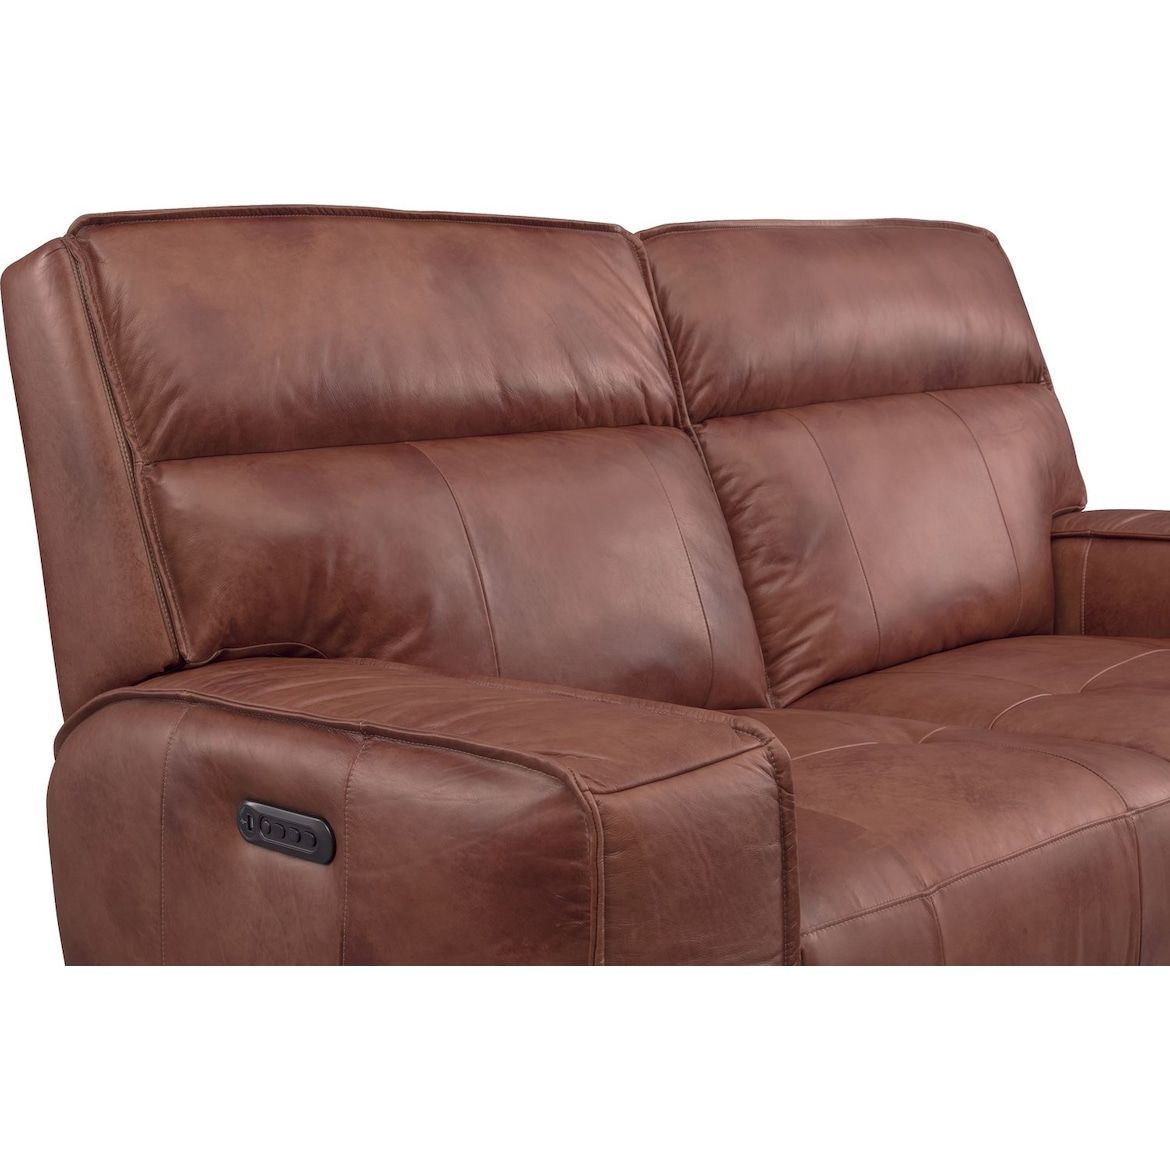 Bradley Triple Power Reclining Sofa, Loveseat And Recliner Pertaining To Charleston Triple Power Reclining Sofas (View 8 of 15)